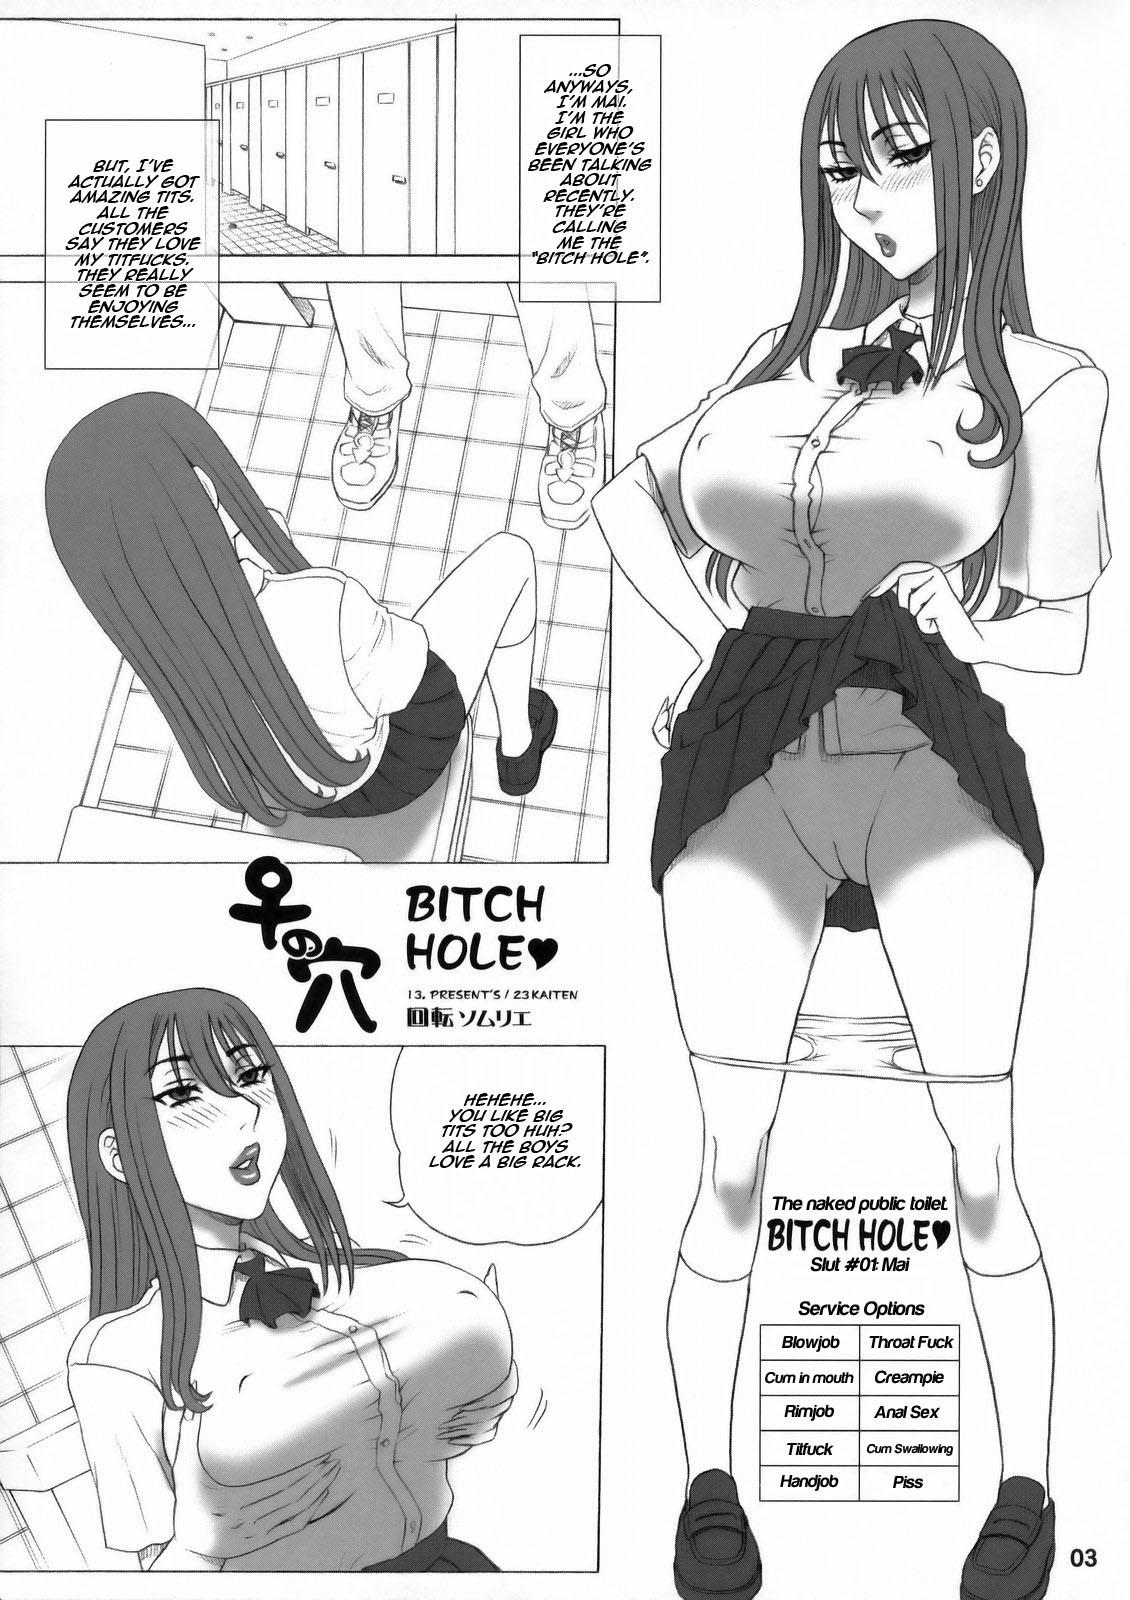 Gaystraight 23 Kaiten ♀ no Ana - Bitch Hole Family Roleplay - Page 2